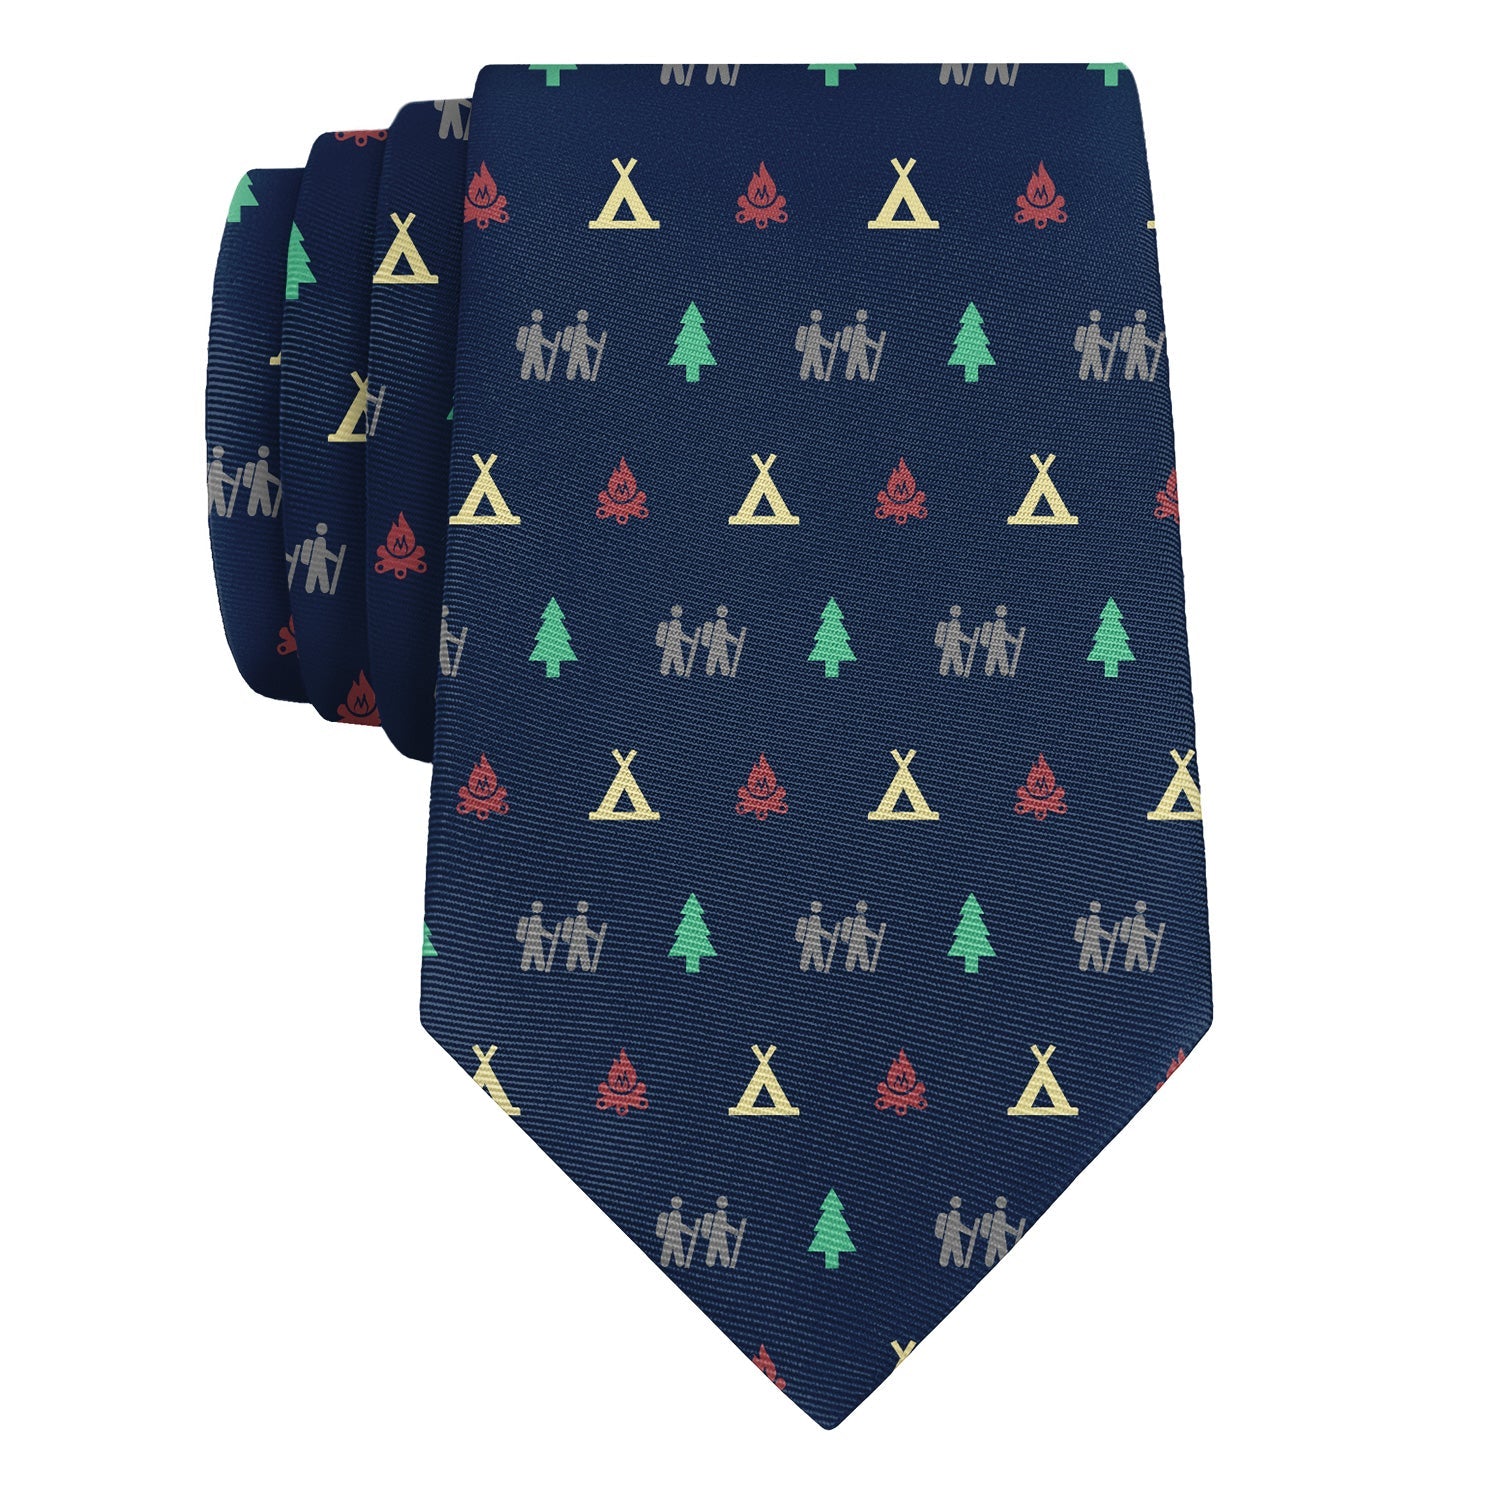 Camping With Friends Necktie - Knotty 2.75" -  - Knotty Tie Co.